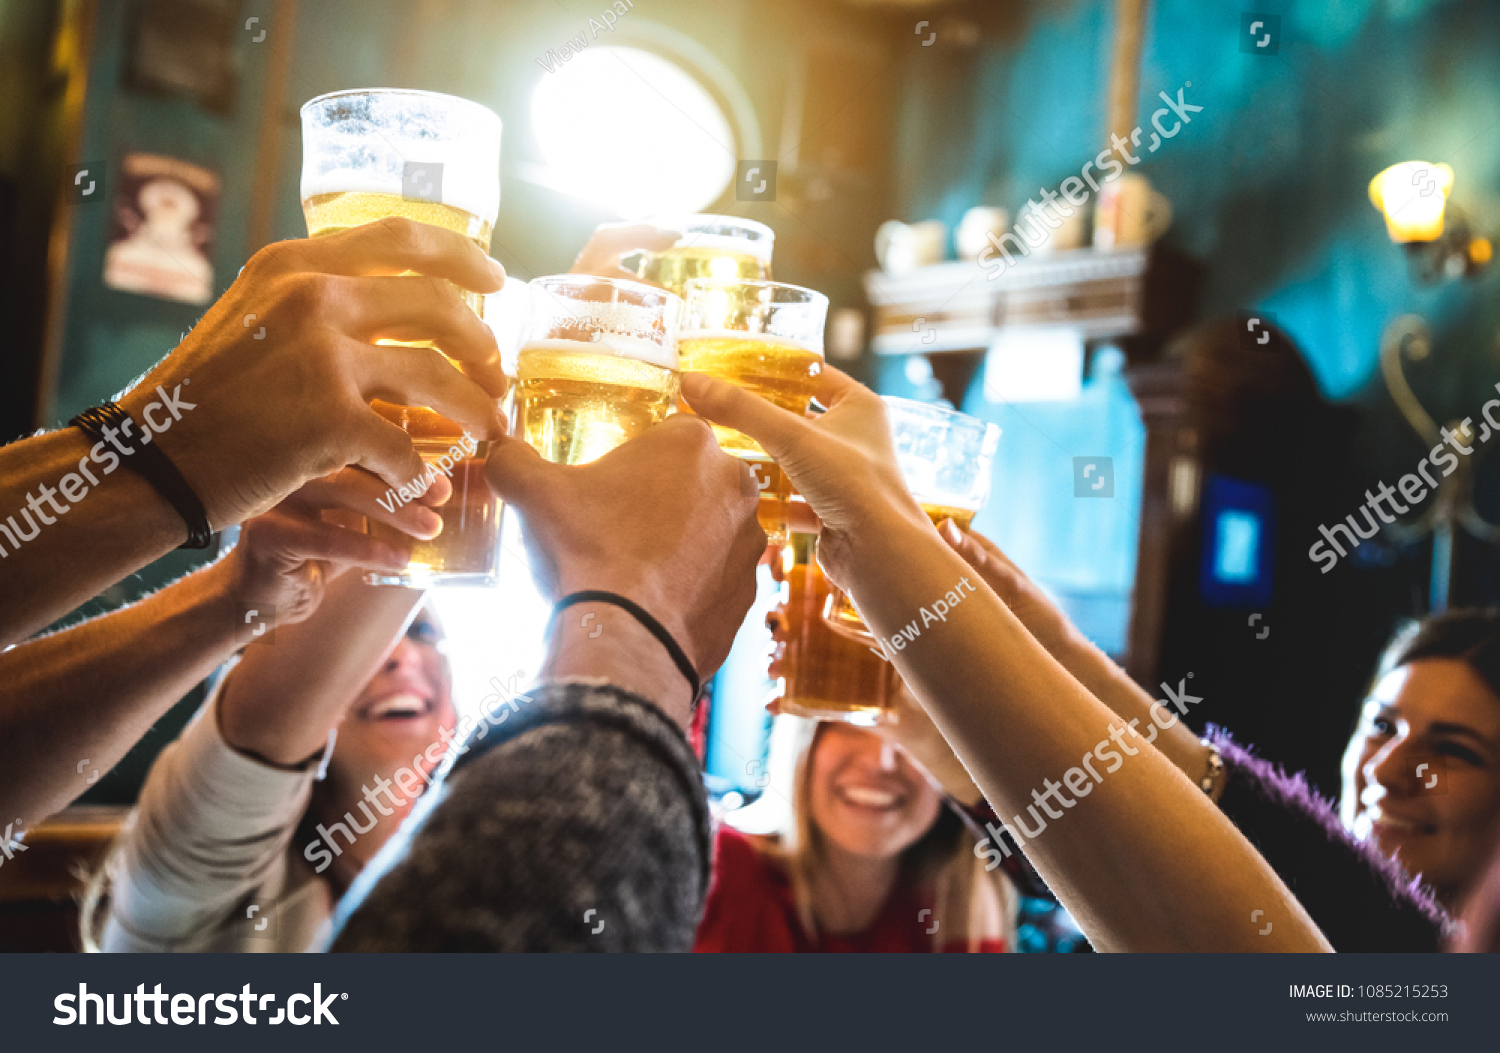 Group of happy friends drinking and toasting beer at brewery bar restaurant - Friendship concept with young people having fun together at cool vintage pub - Focus on middle pint glass - High iso image #1085215253